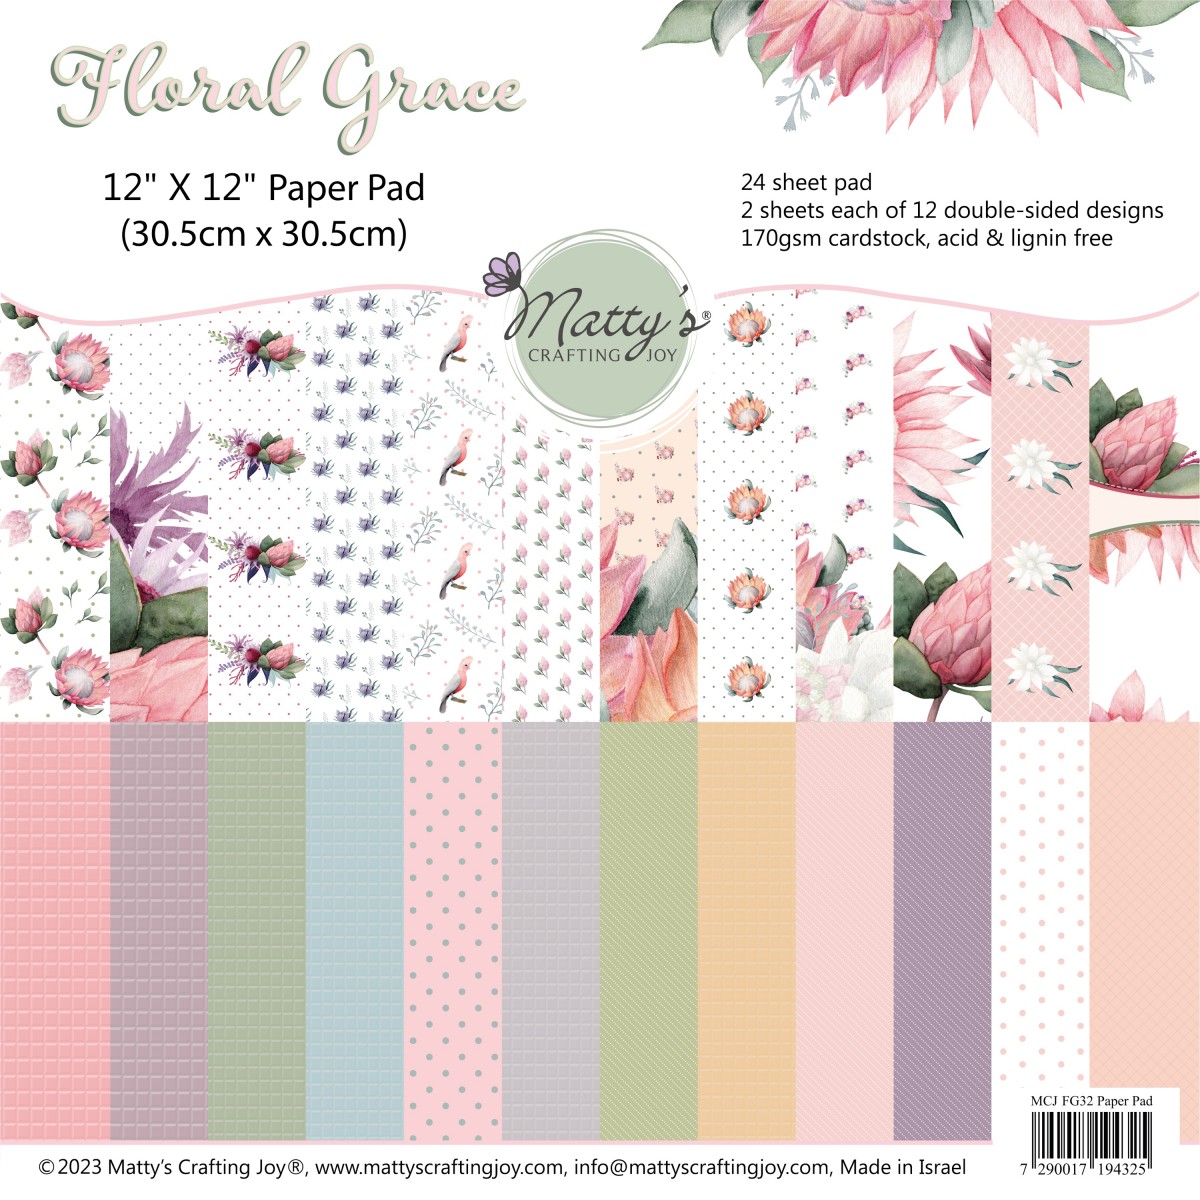 Matty's Crafting Joy Floral Grace 12x12 Double Sided Scrapbook Cardstock Paper Pad, 24 Floral Designer Patterned Paper Pack